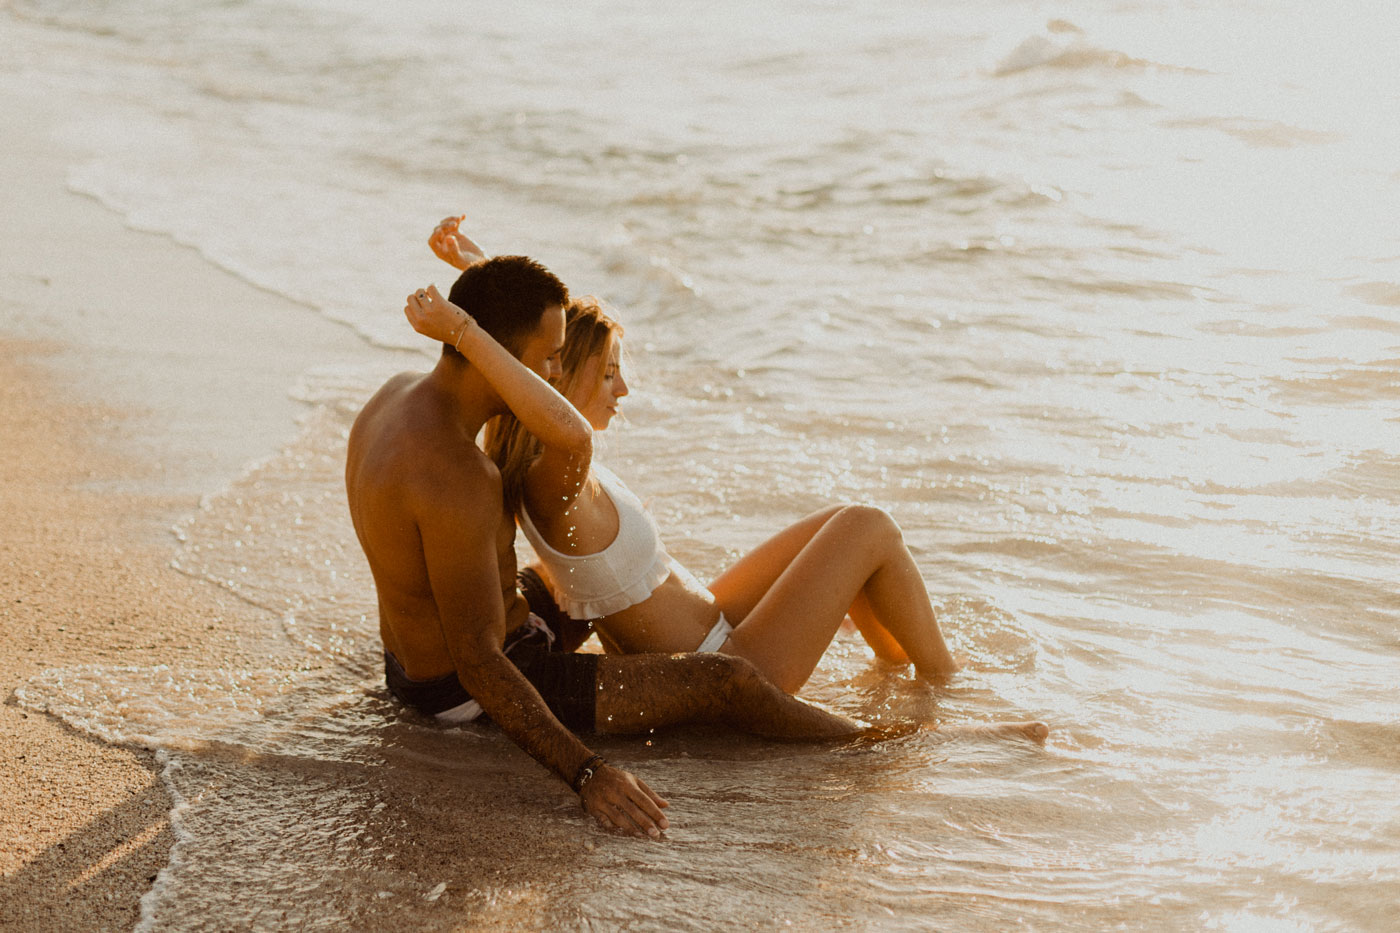 Couple session at the beach in Reunion Island